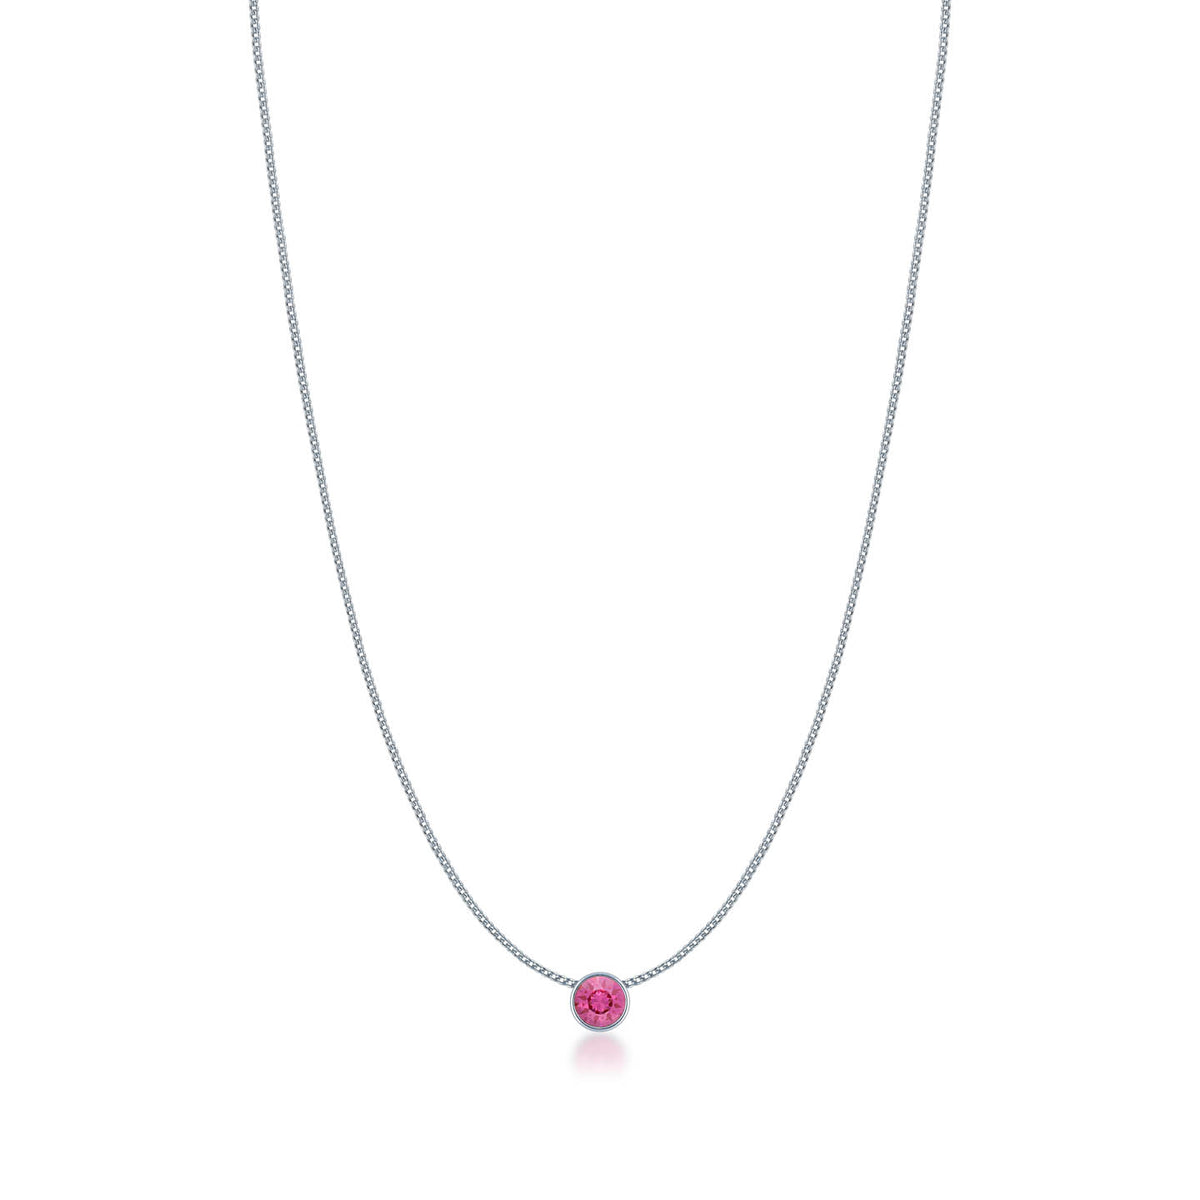 Harley Small Pendant Necklace with Pink Rose Round Crystals from Swarovski Silver Toned Rhodium Plated - Ed Heart